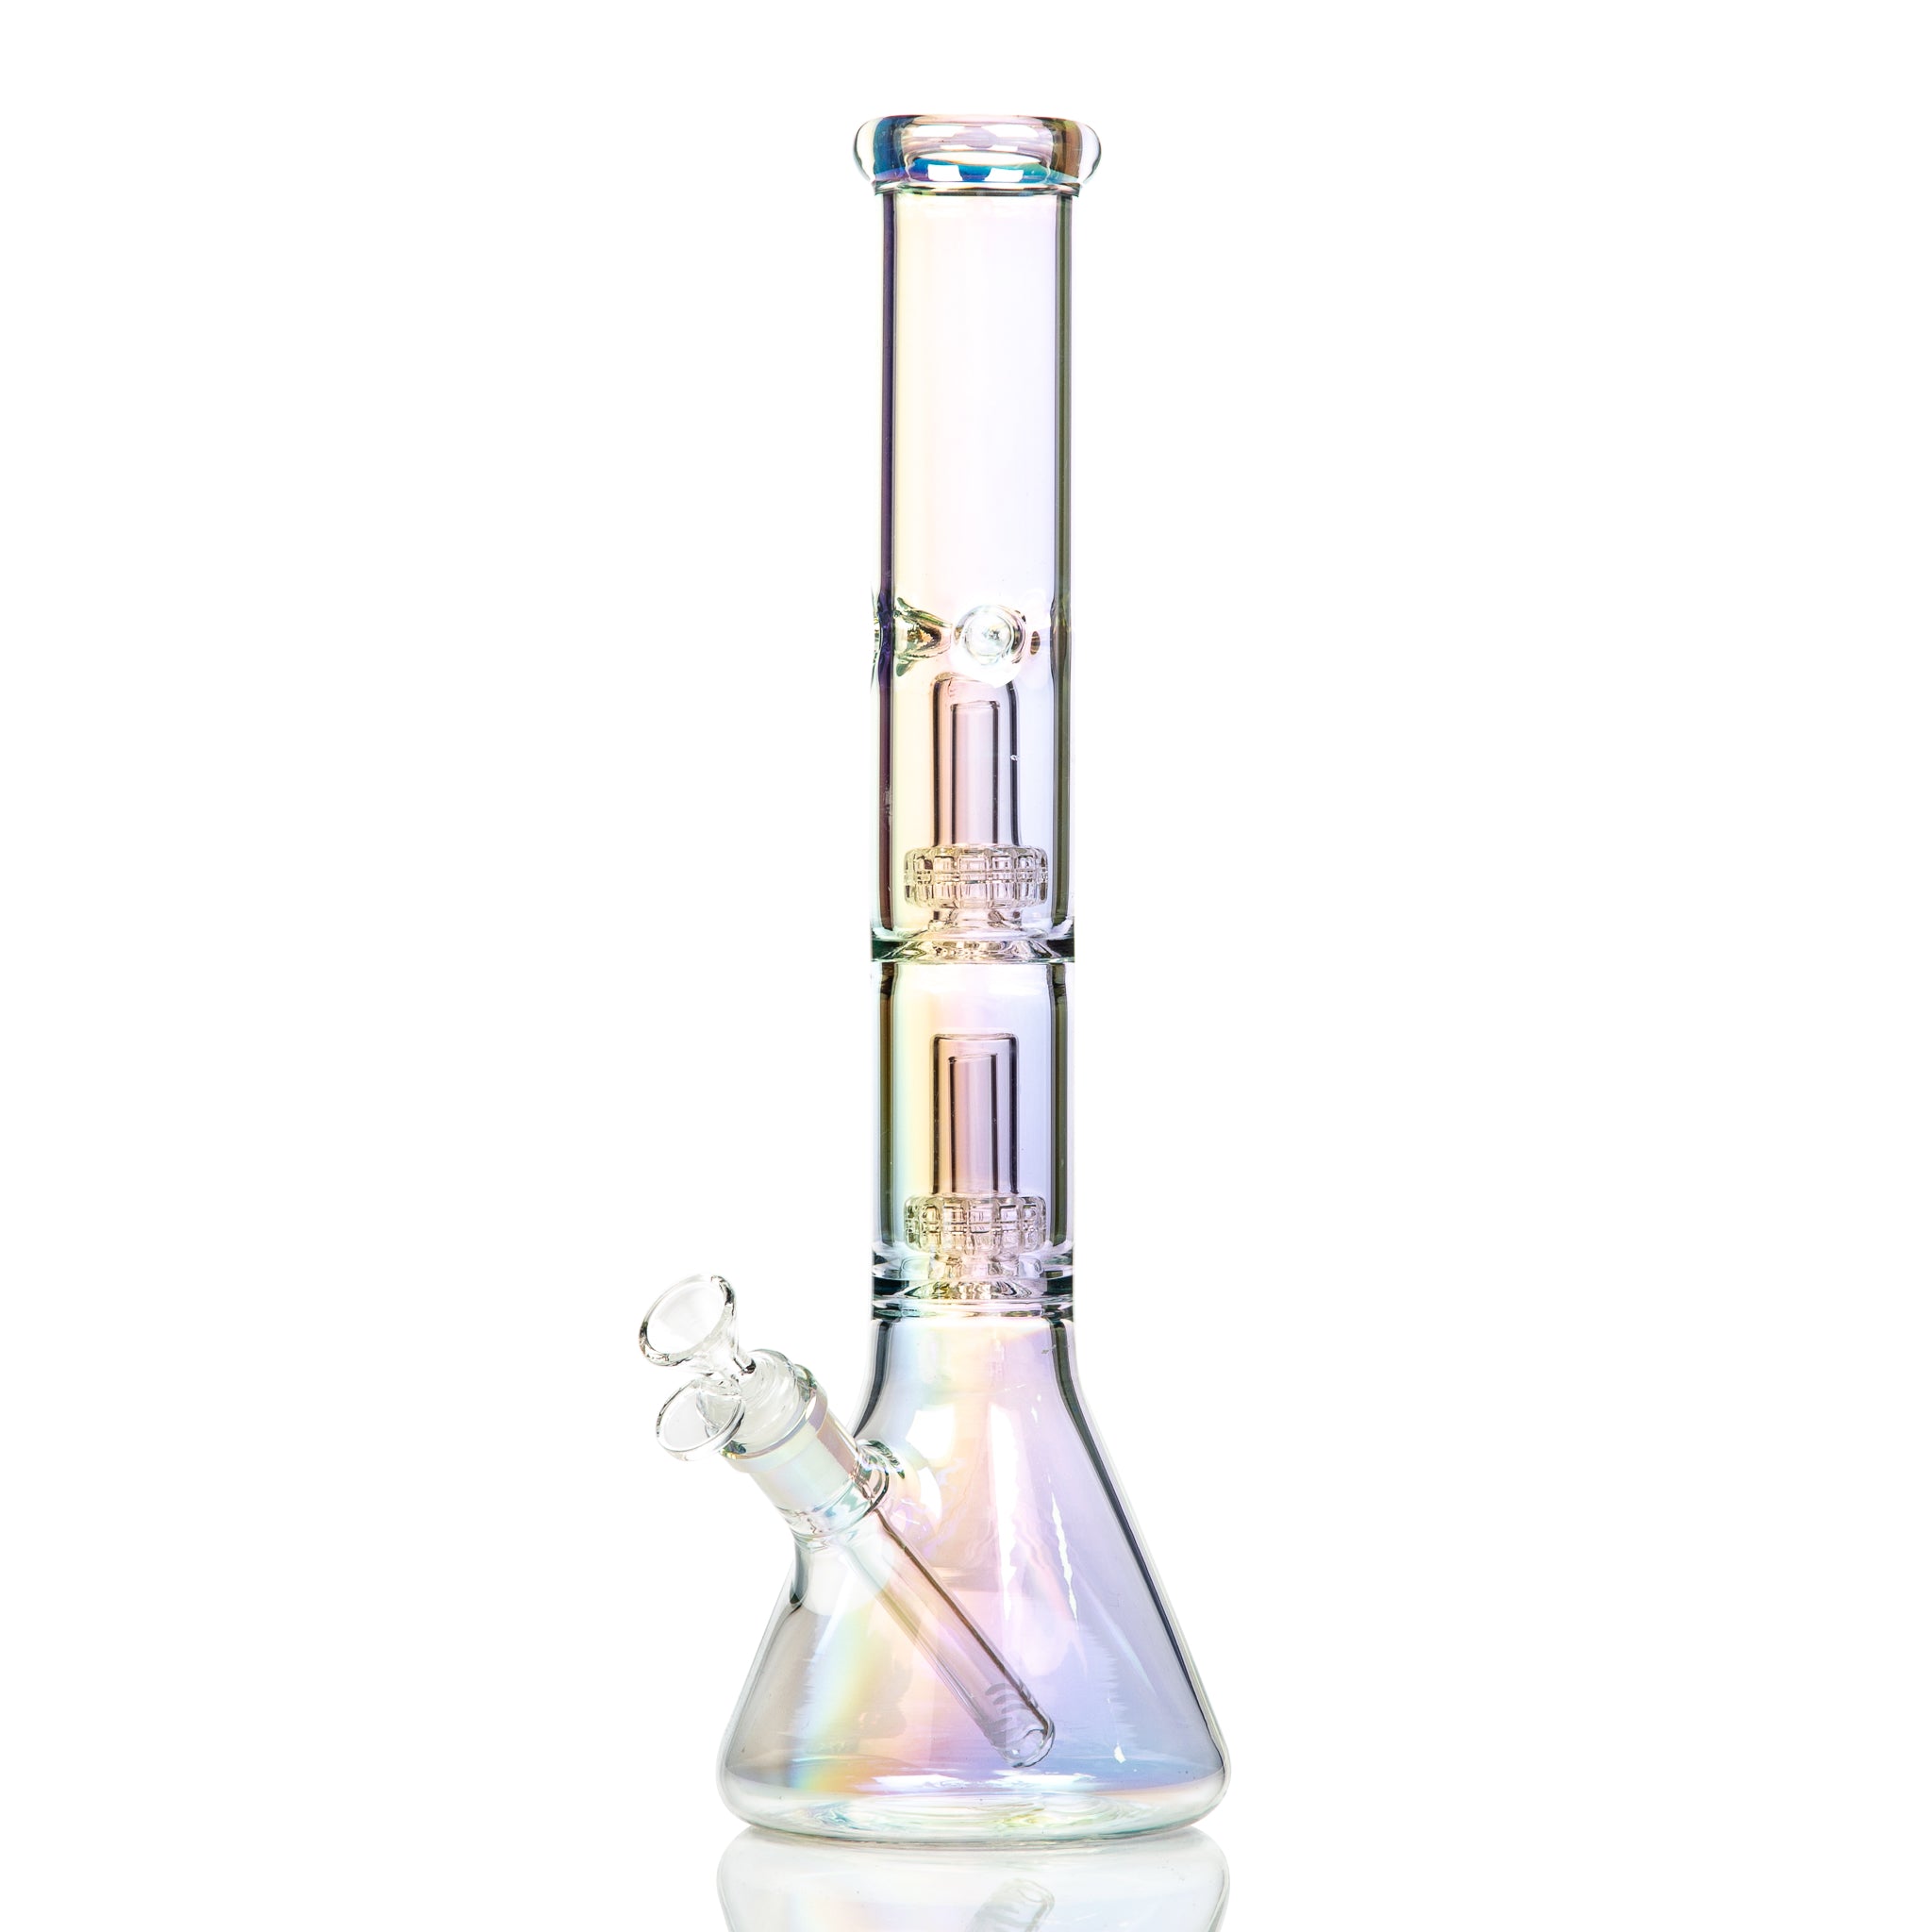 A tall glass beaker bong with holographic or chromatic effect. This bong features two UFO style percs.